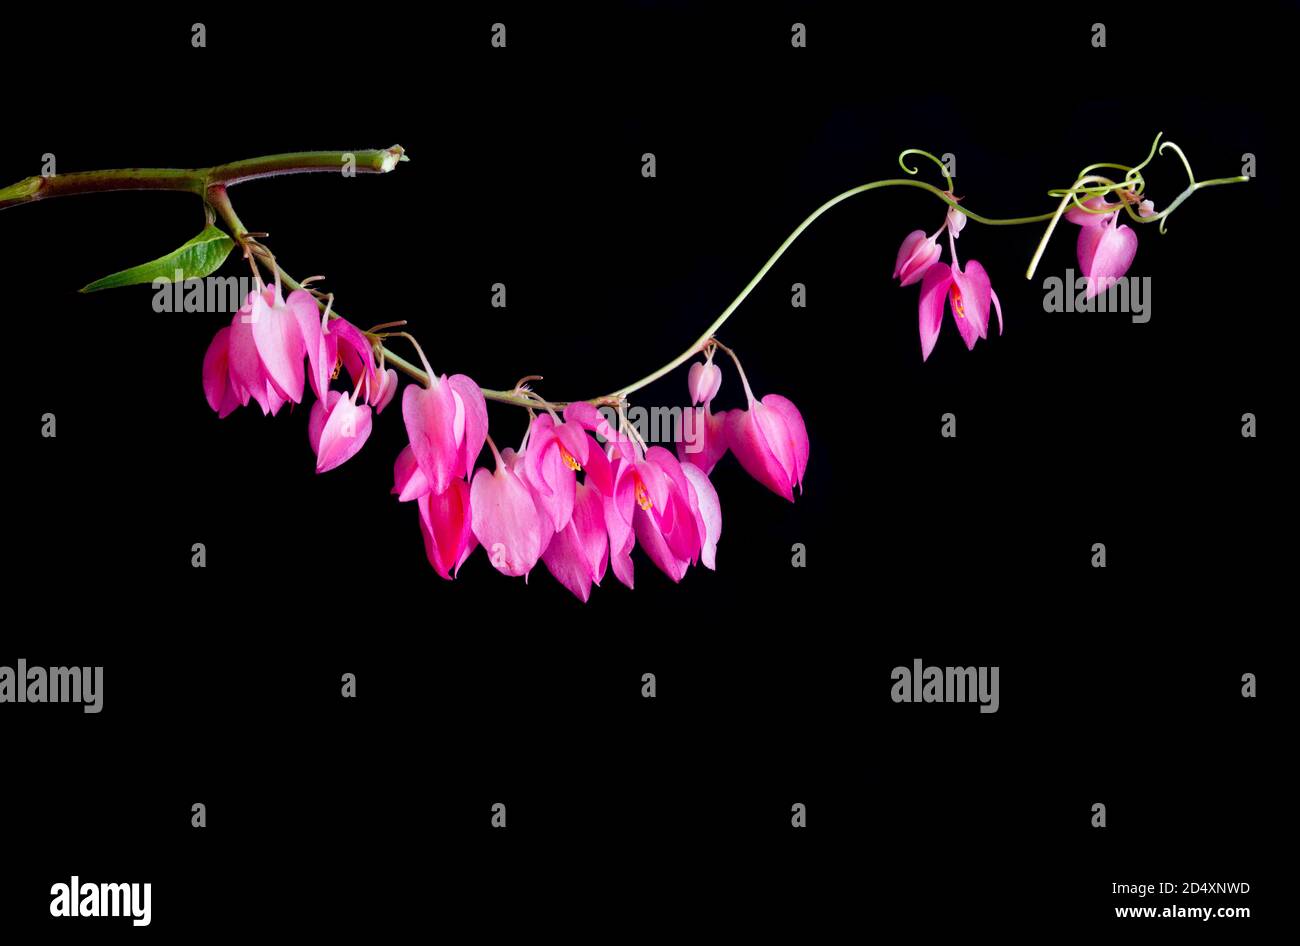 Wild Pink flowers on a winding long green stem with a black background. Stock Photo